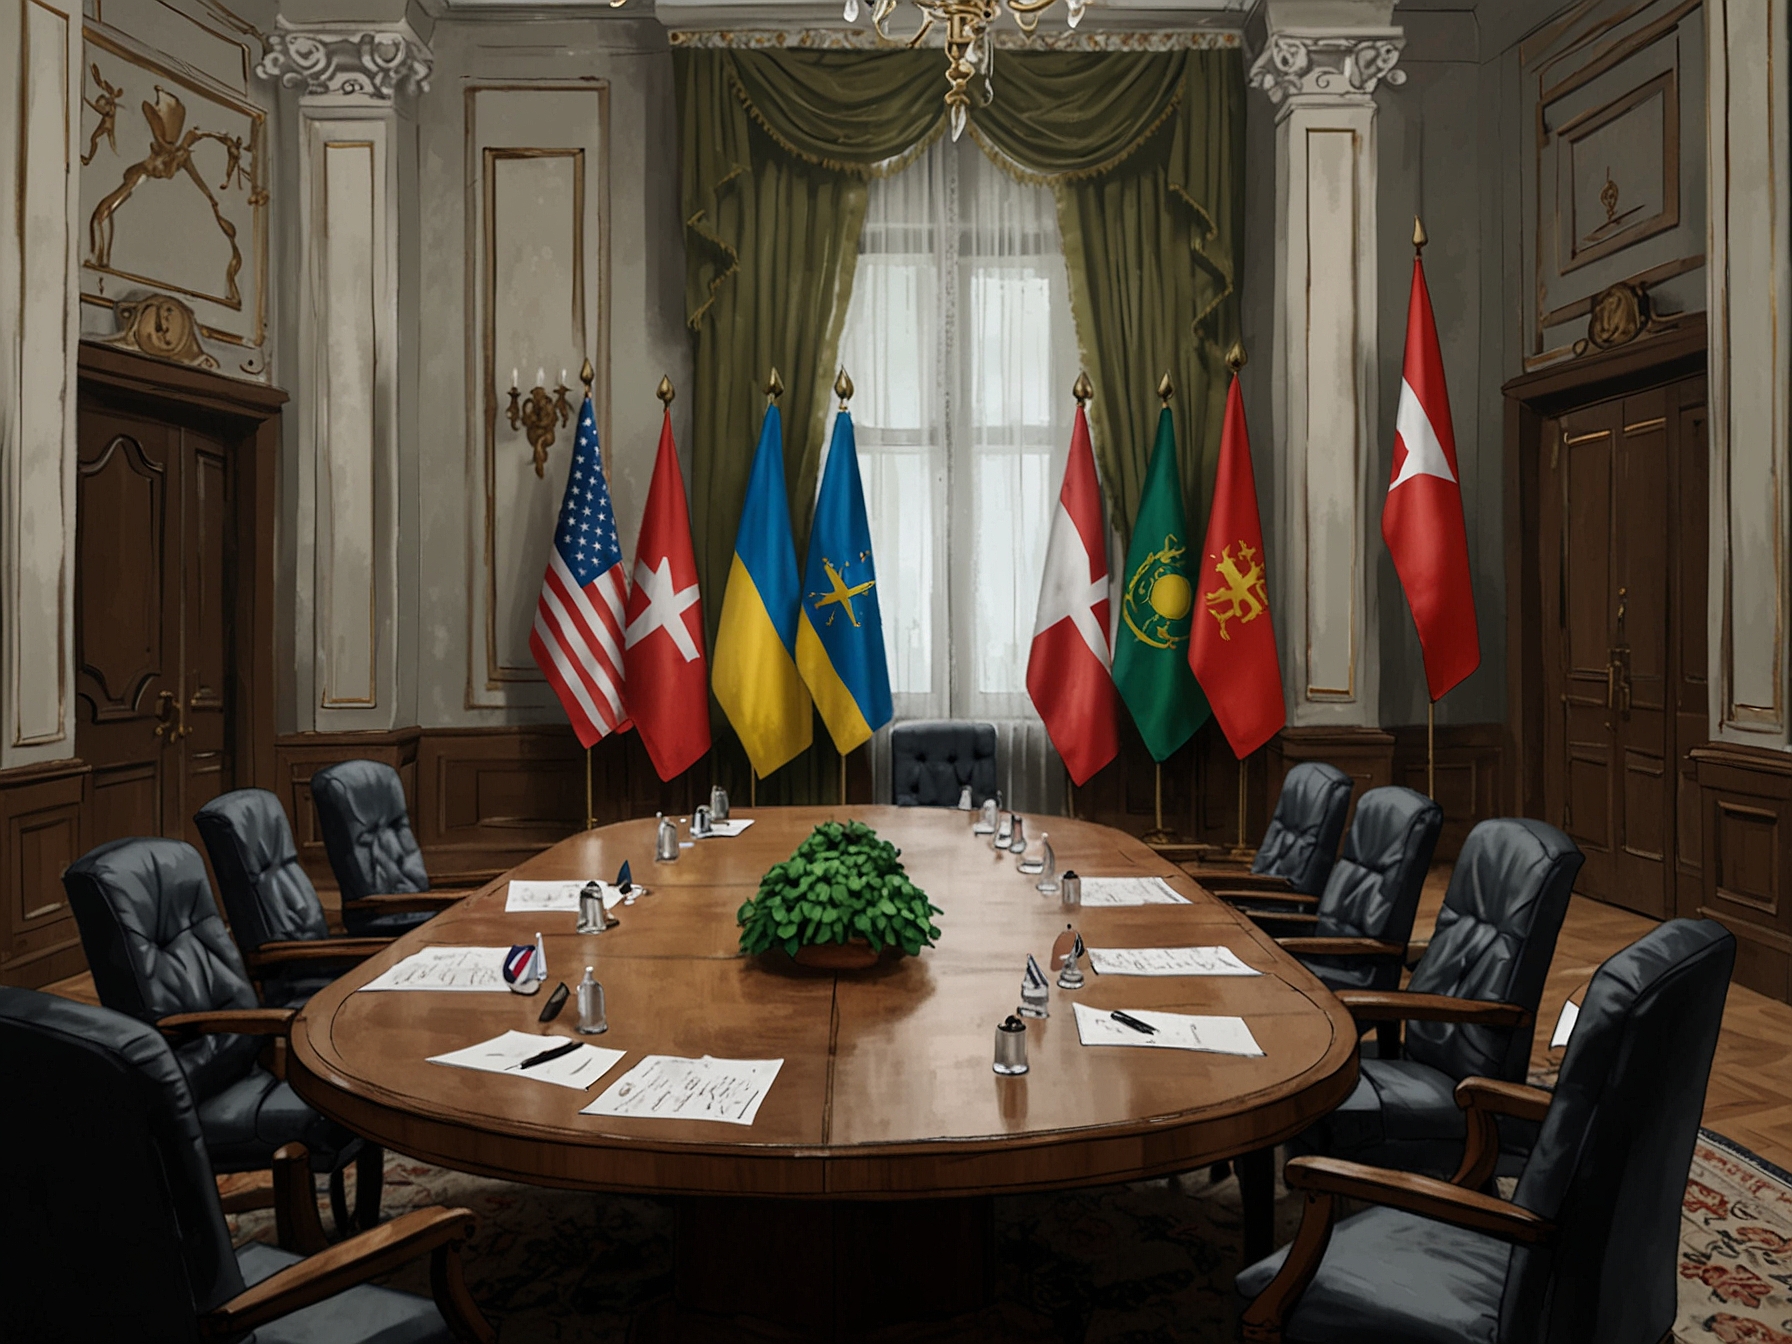 A meeting room setup with flags of Hungary and Ukraine, representing the high-stakes discussions between Orbán and Zelenskyy on military aid, reconstruction, and geopolitical strategies.